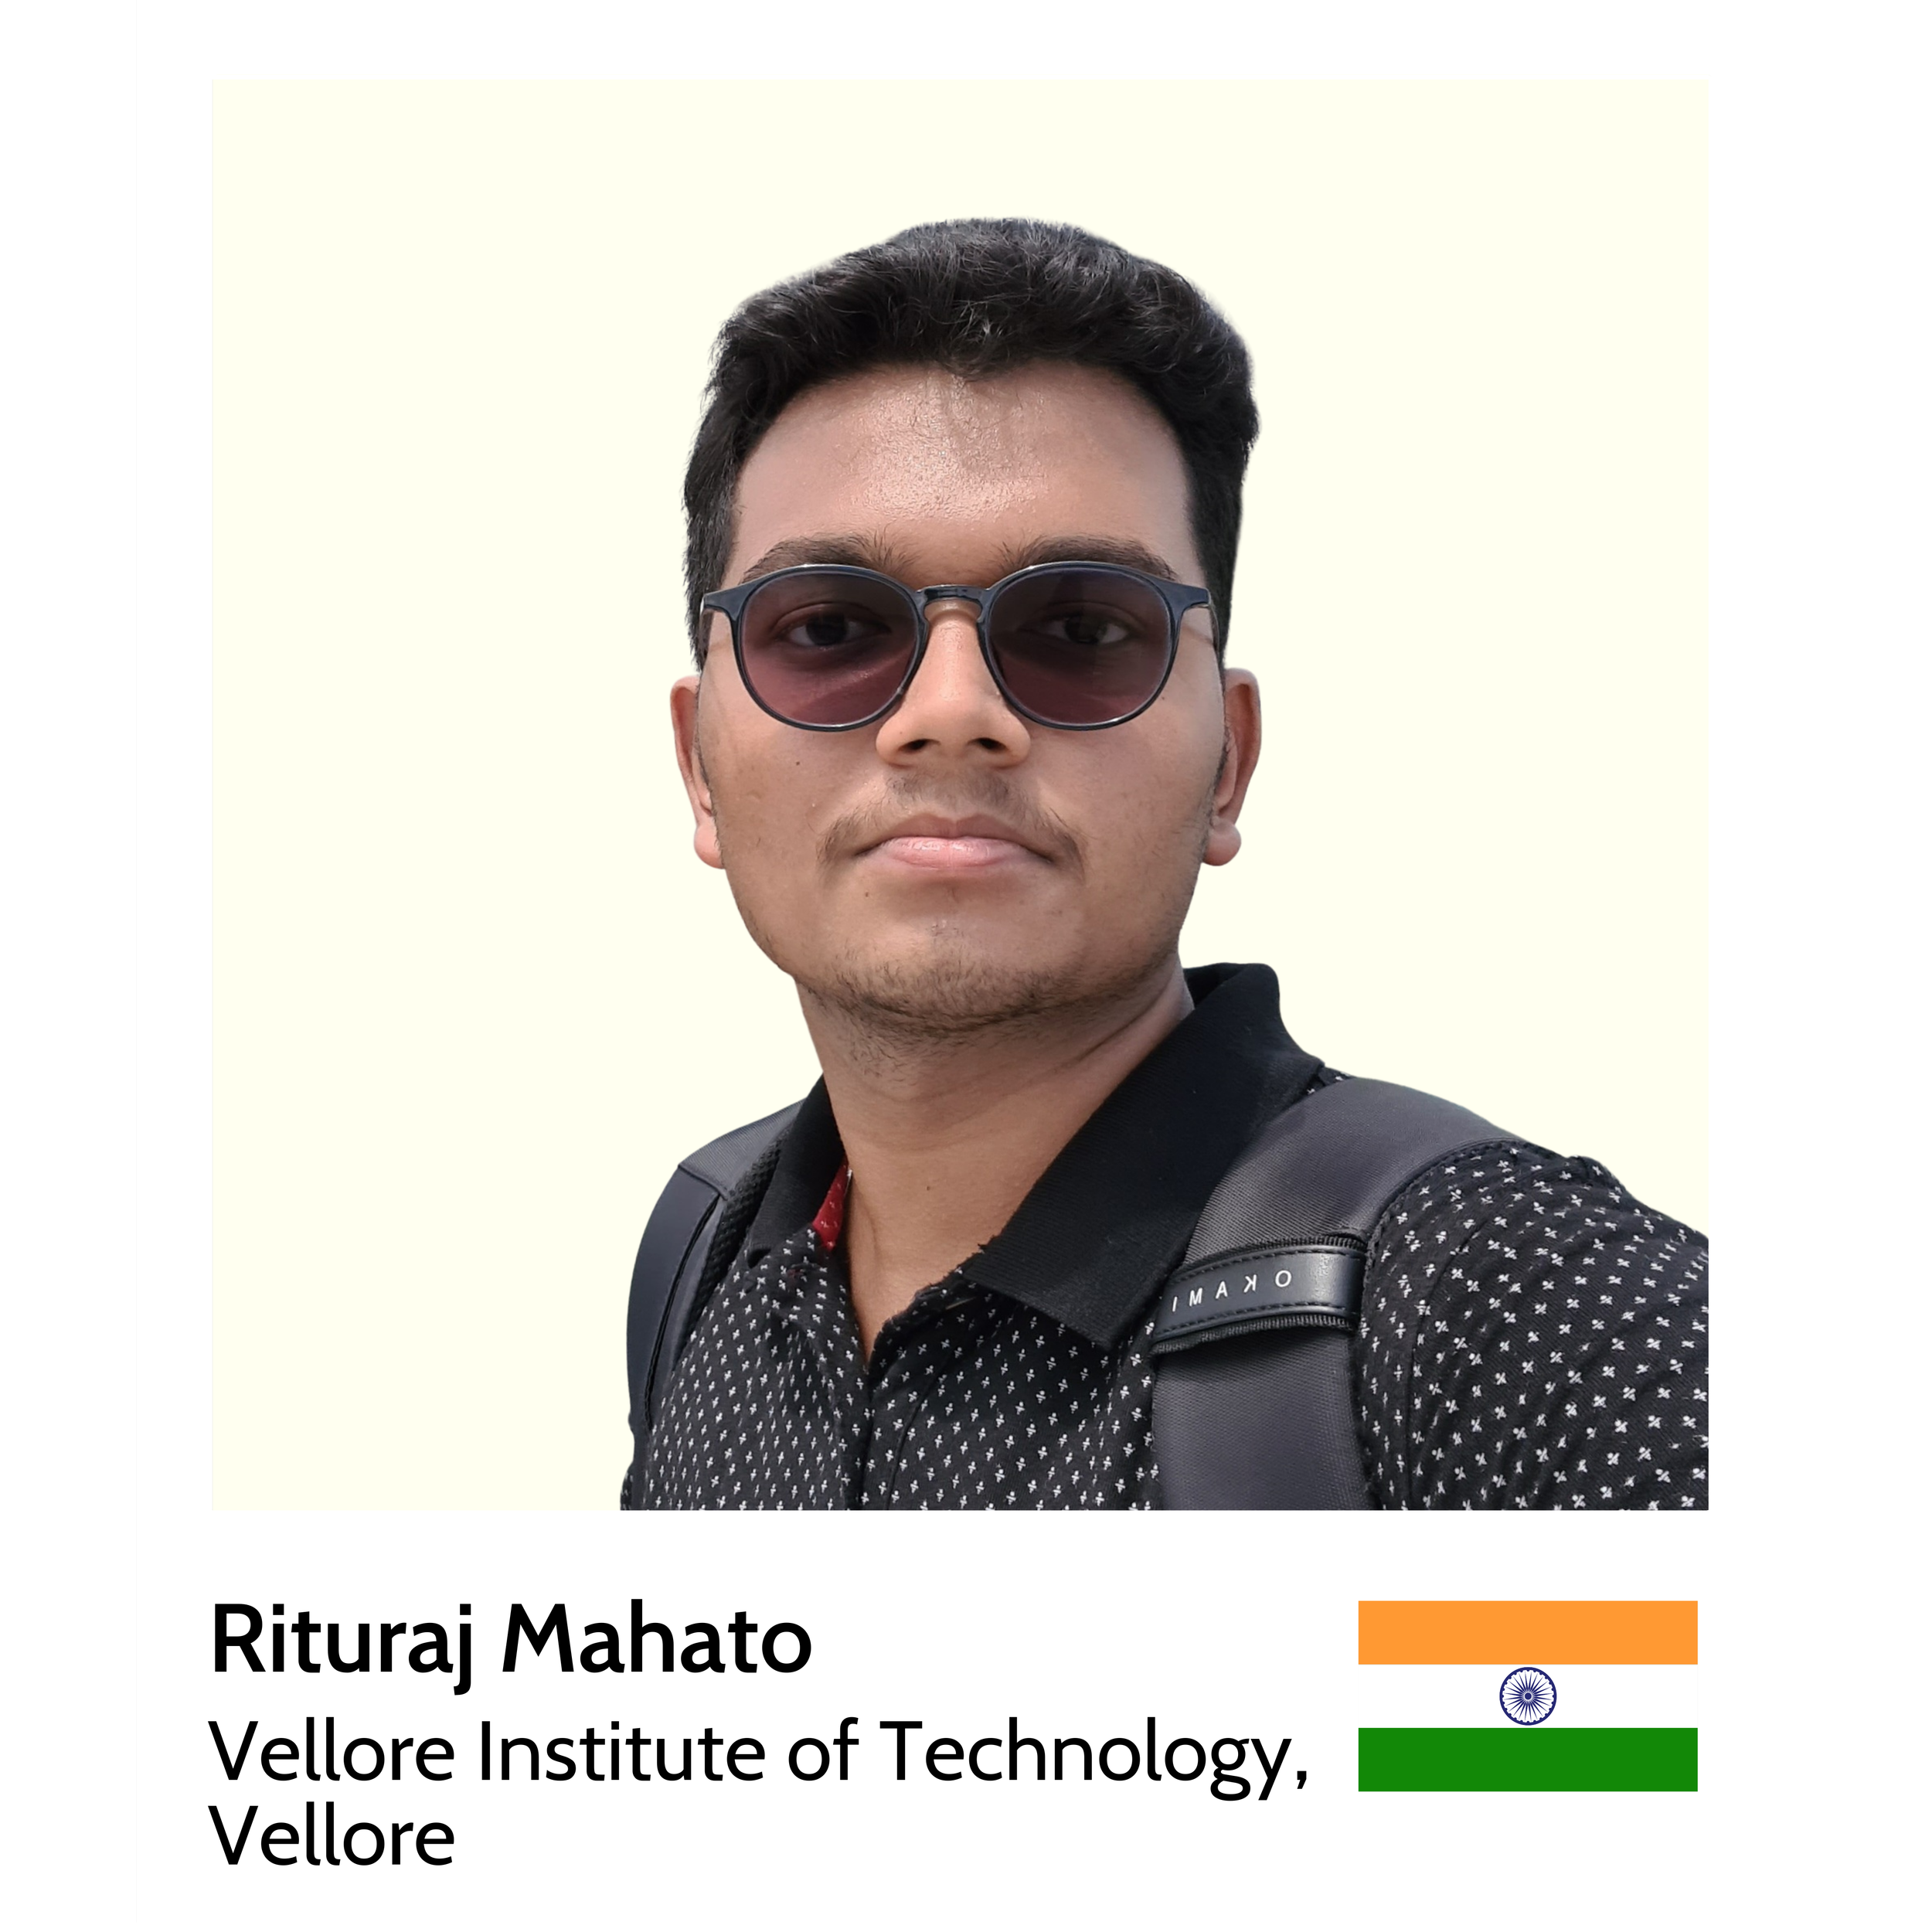 Your_Big_Year_ibm_zsystems_ambassador_Rituraj_Mahato_Vellore_Institute_of_Technology,_Vellore.png